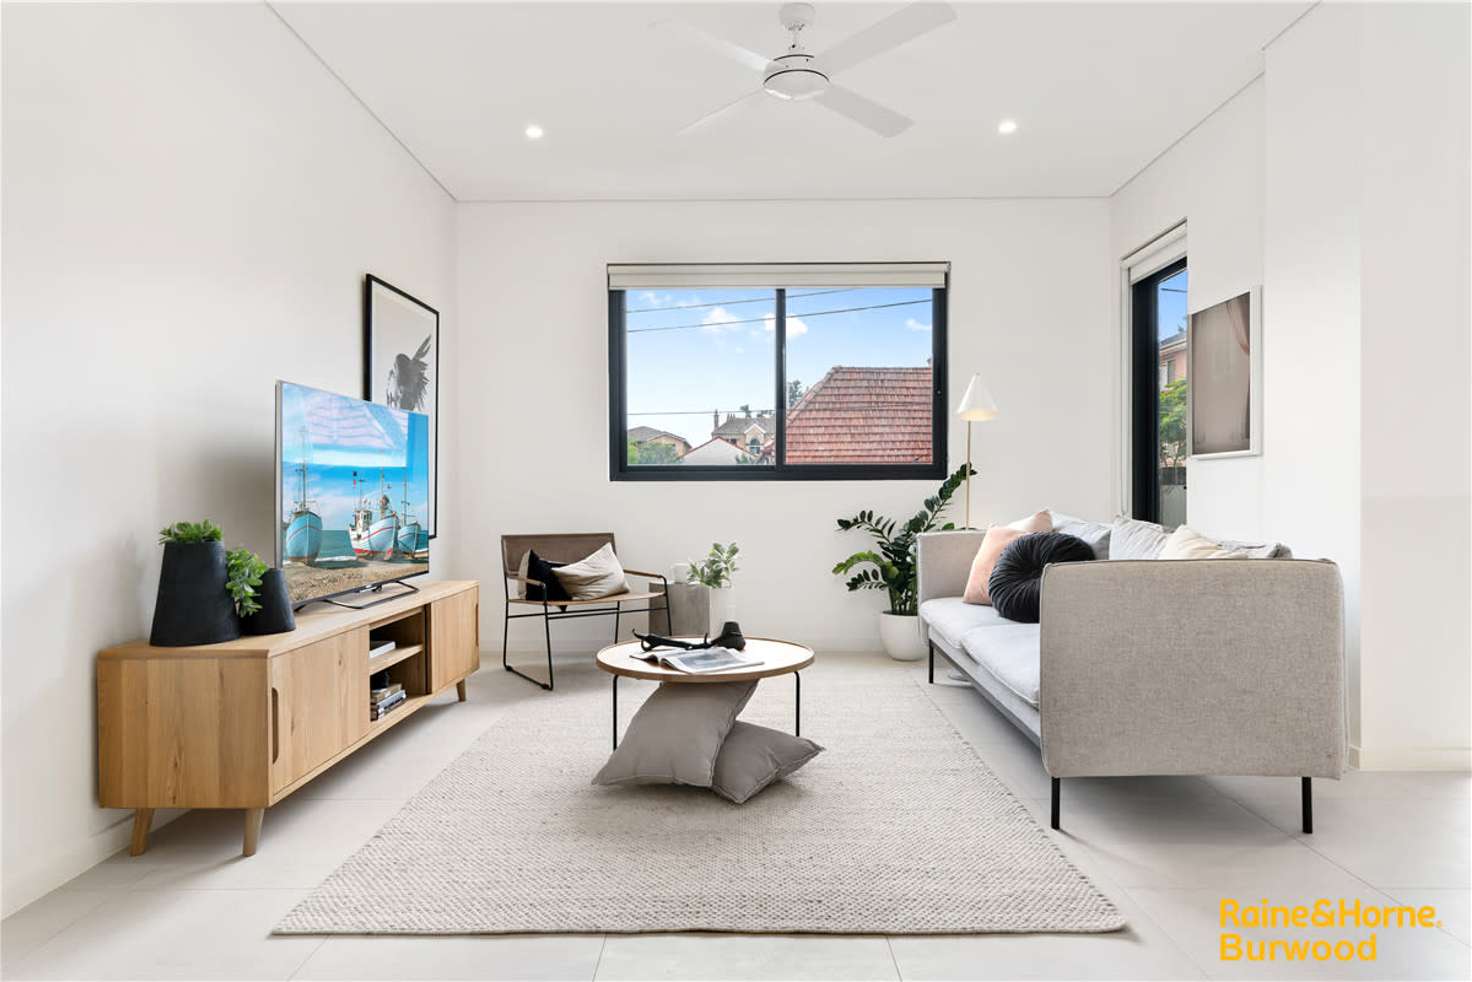 Main view of Homely apartment listing, 1.1/10 Gladstone Street, Burwood NSW 2134